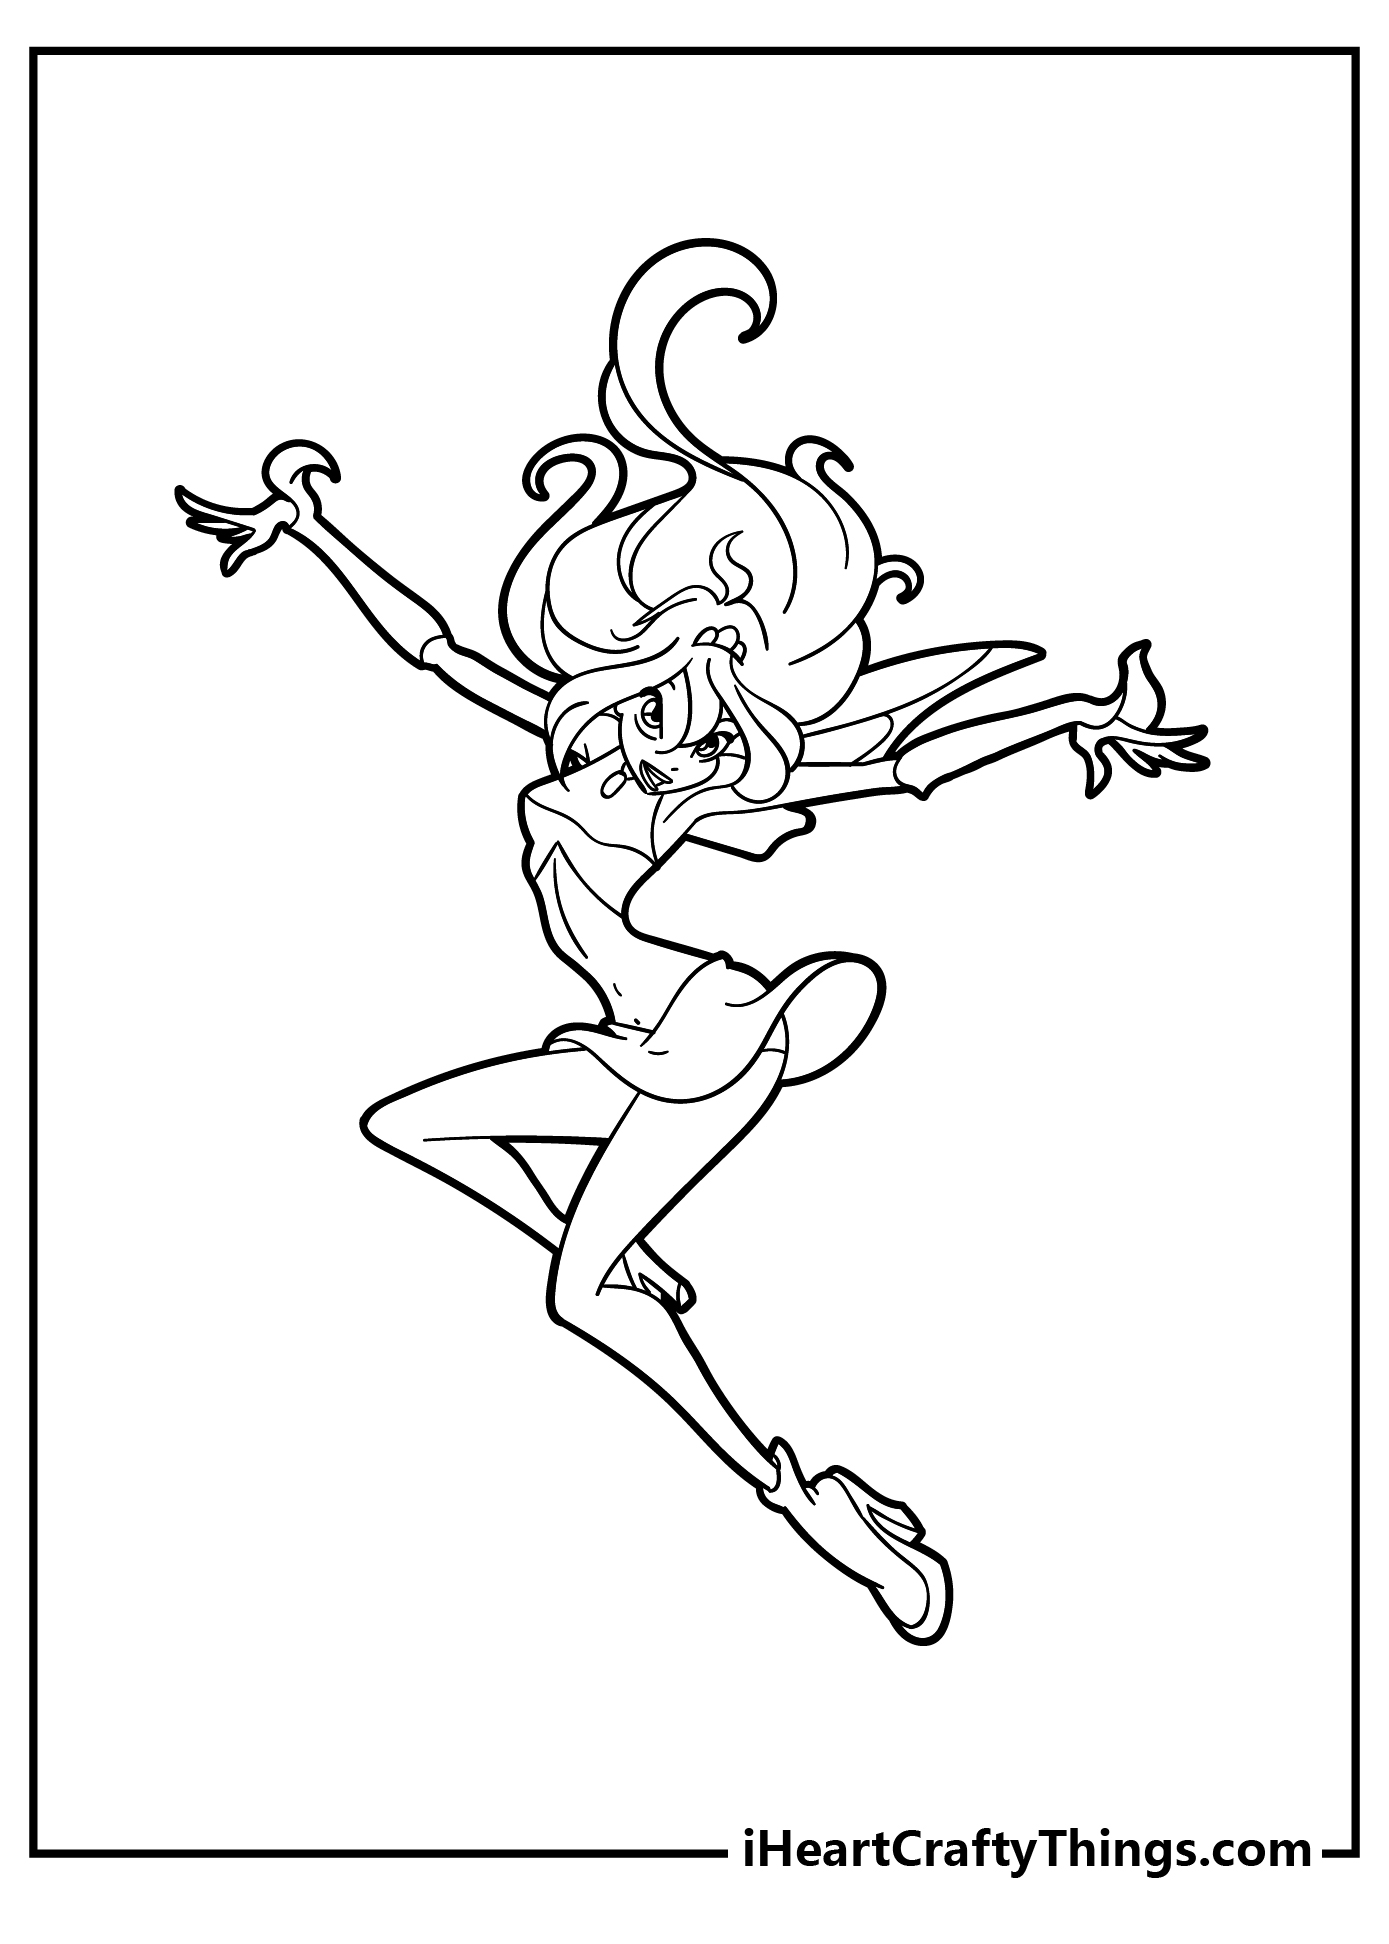 Winx Coloring Pages free pdf download